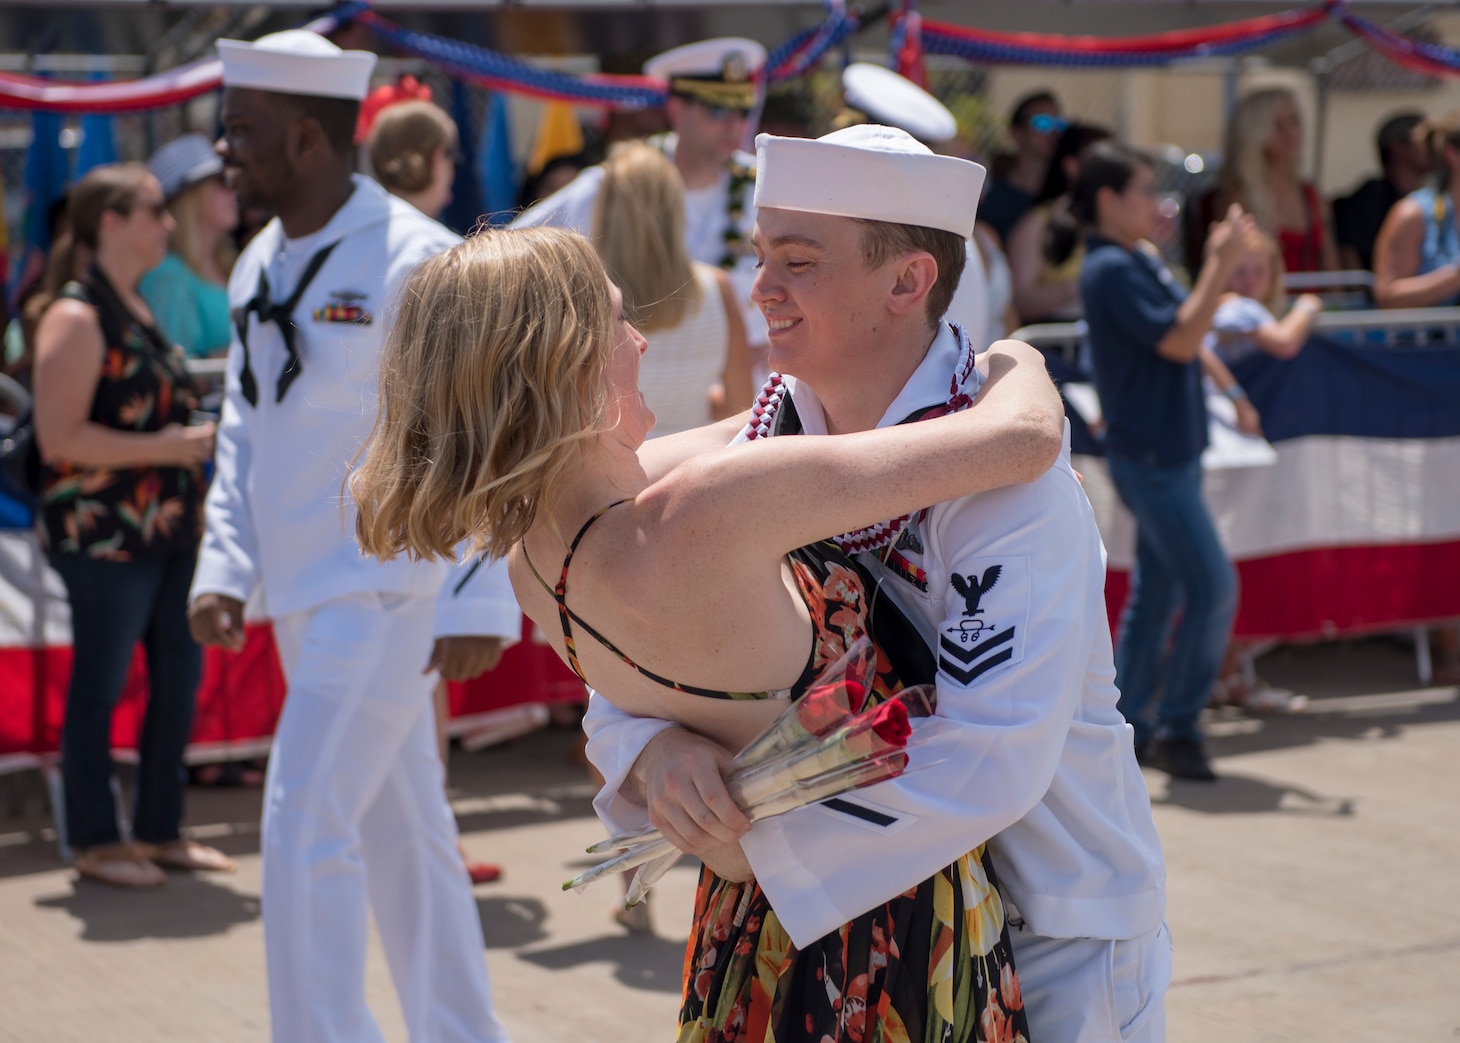 180330-N-LY160-0135 PEARL HARBOR, Hawaii (March 30, 2018) Sonar Technician Submarine 2nd Class Michael Mize, assigned to the Virginia-class fast-attack submarine USS Mississippi (SSN 782), hugs his loved during a homecoming ceremony in Joint Base Pearl Harbor-Hickam, March 30. Mississippi successfully completed a six-month Western Pacific deployment. (U.S. Navy photo by Mass Communication Specialist 2nd Class Michael H. Lee/ Released)